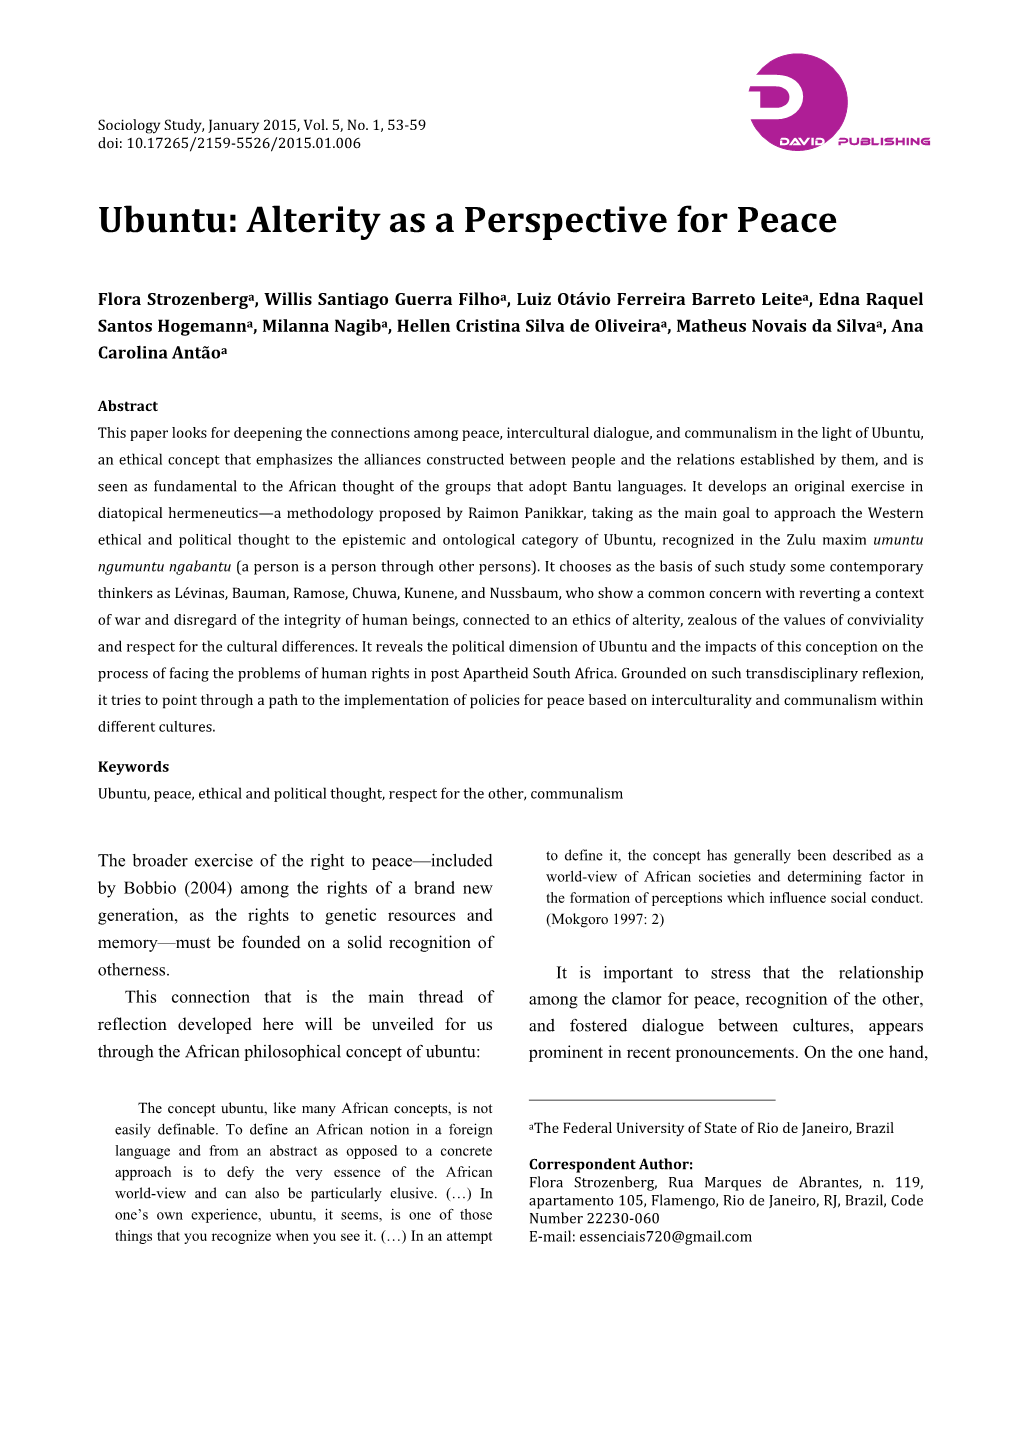 Alterity As a Perspective for Peace